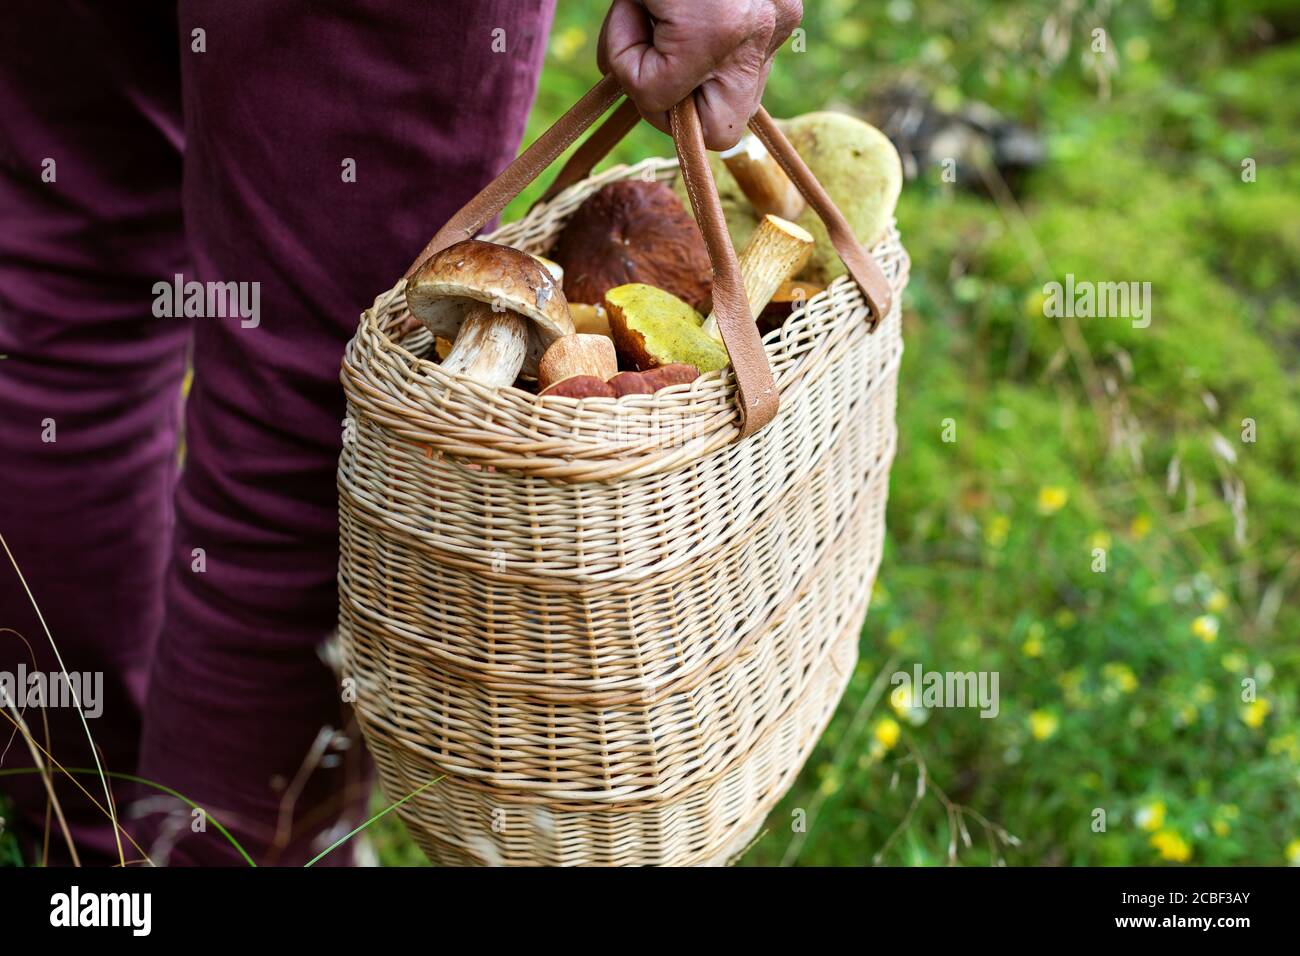 mushroom hunting - person in forest with basket full of mushrooms Stock Photo